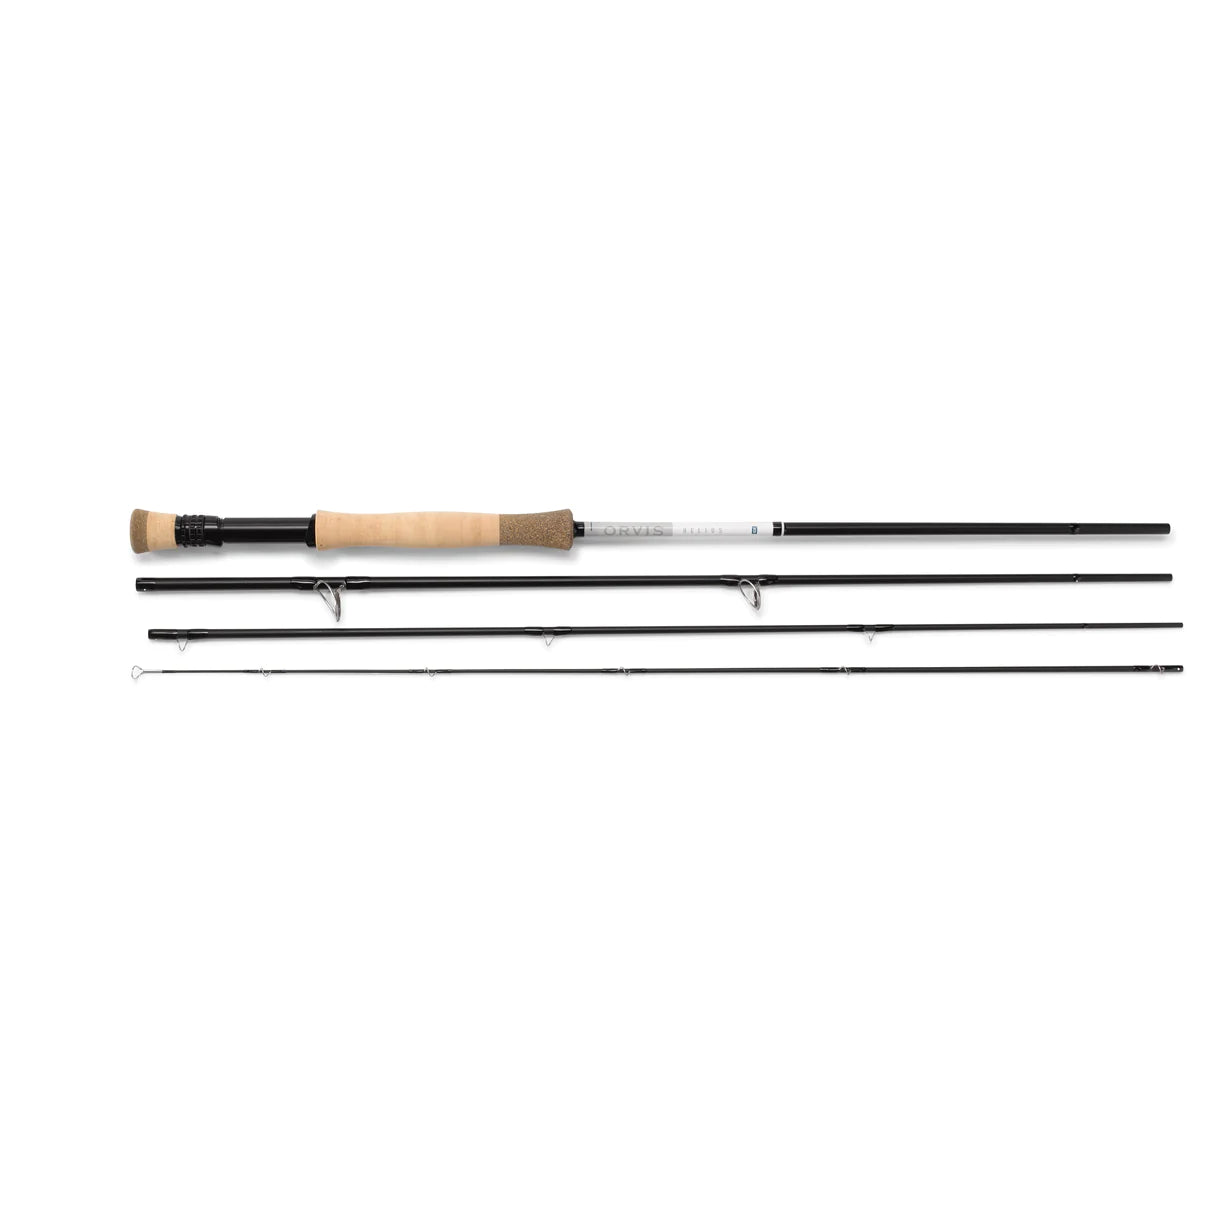 Orvis Helios 4D Fly Rods - NEW!